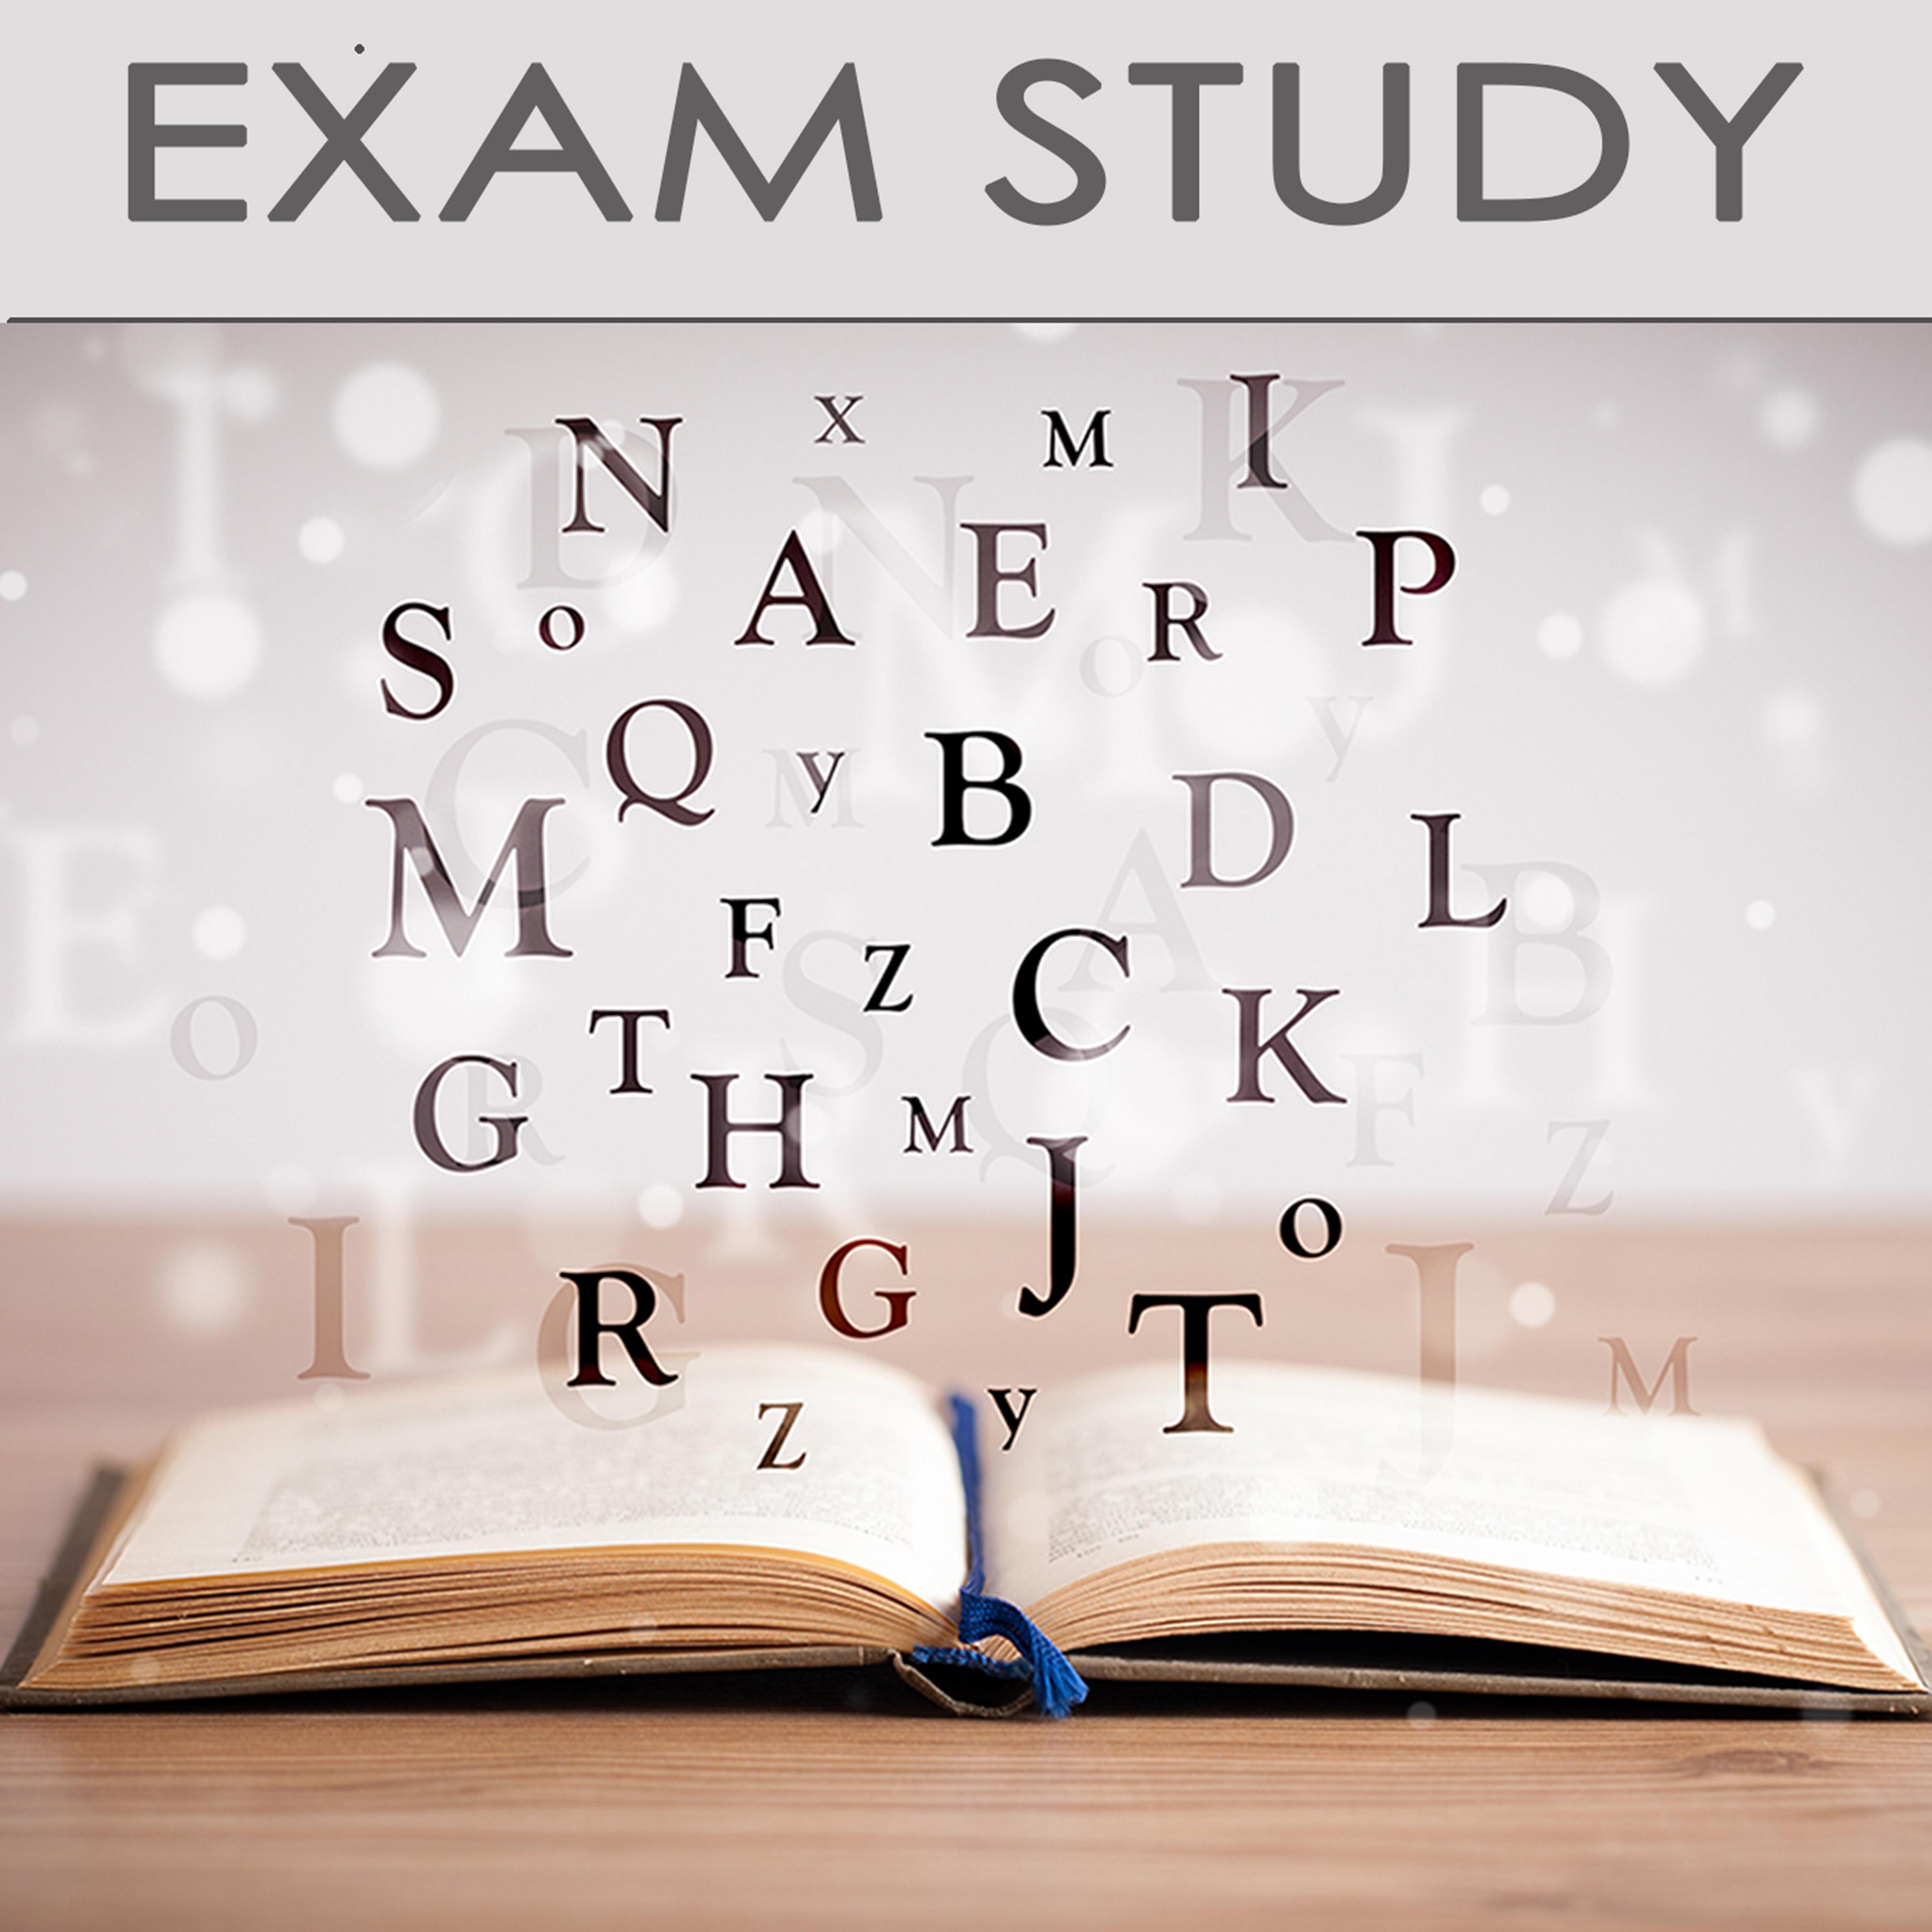 Exam Study Piano Music to Increase Brain Power, Soft Classic Study Music for Relaxation, Concentration, Mind Power & Focus On Learning